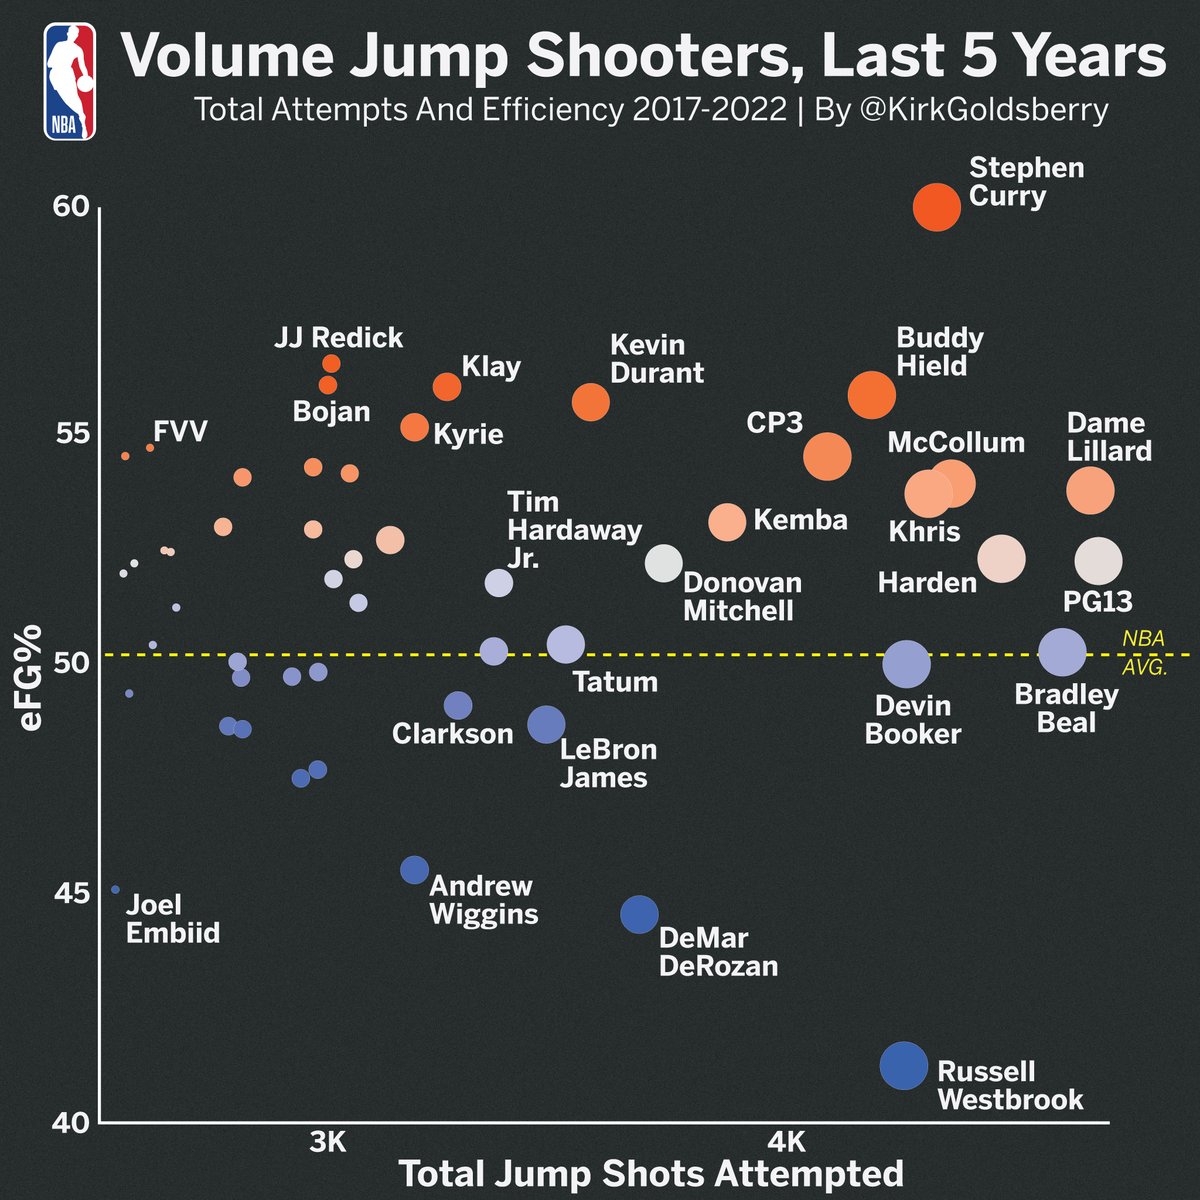 Kirk's Goldsberry bubble plot data visualization showing the efficiency landscape of volume jump shooters in the NBA